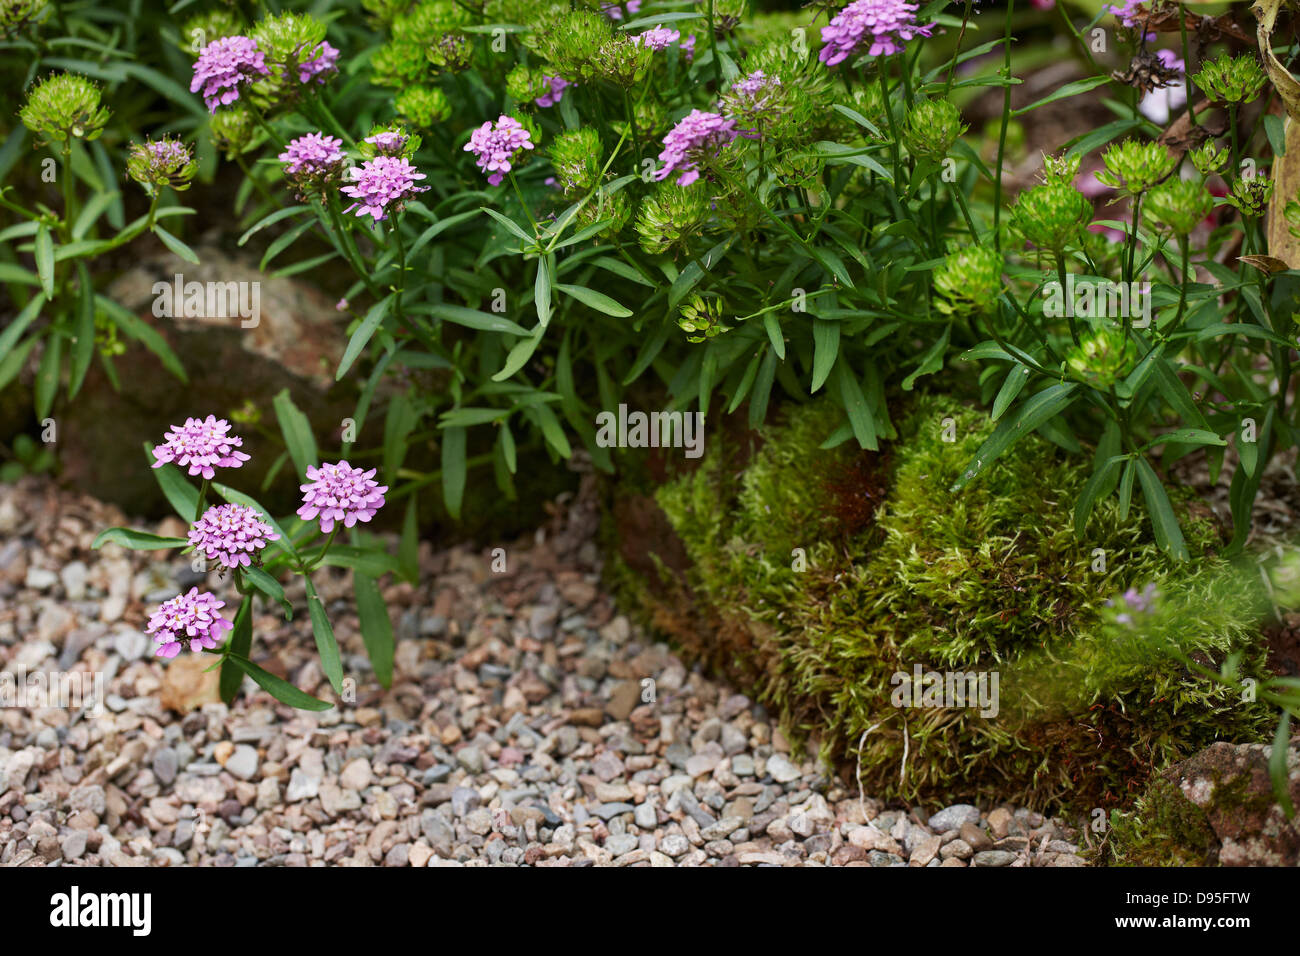 annual candytuft, Iberis umbellata (Fairy Series) garden edging in bloom with moss, gravel and rock landscaping, Canada Stock Photo